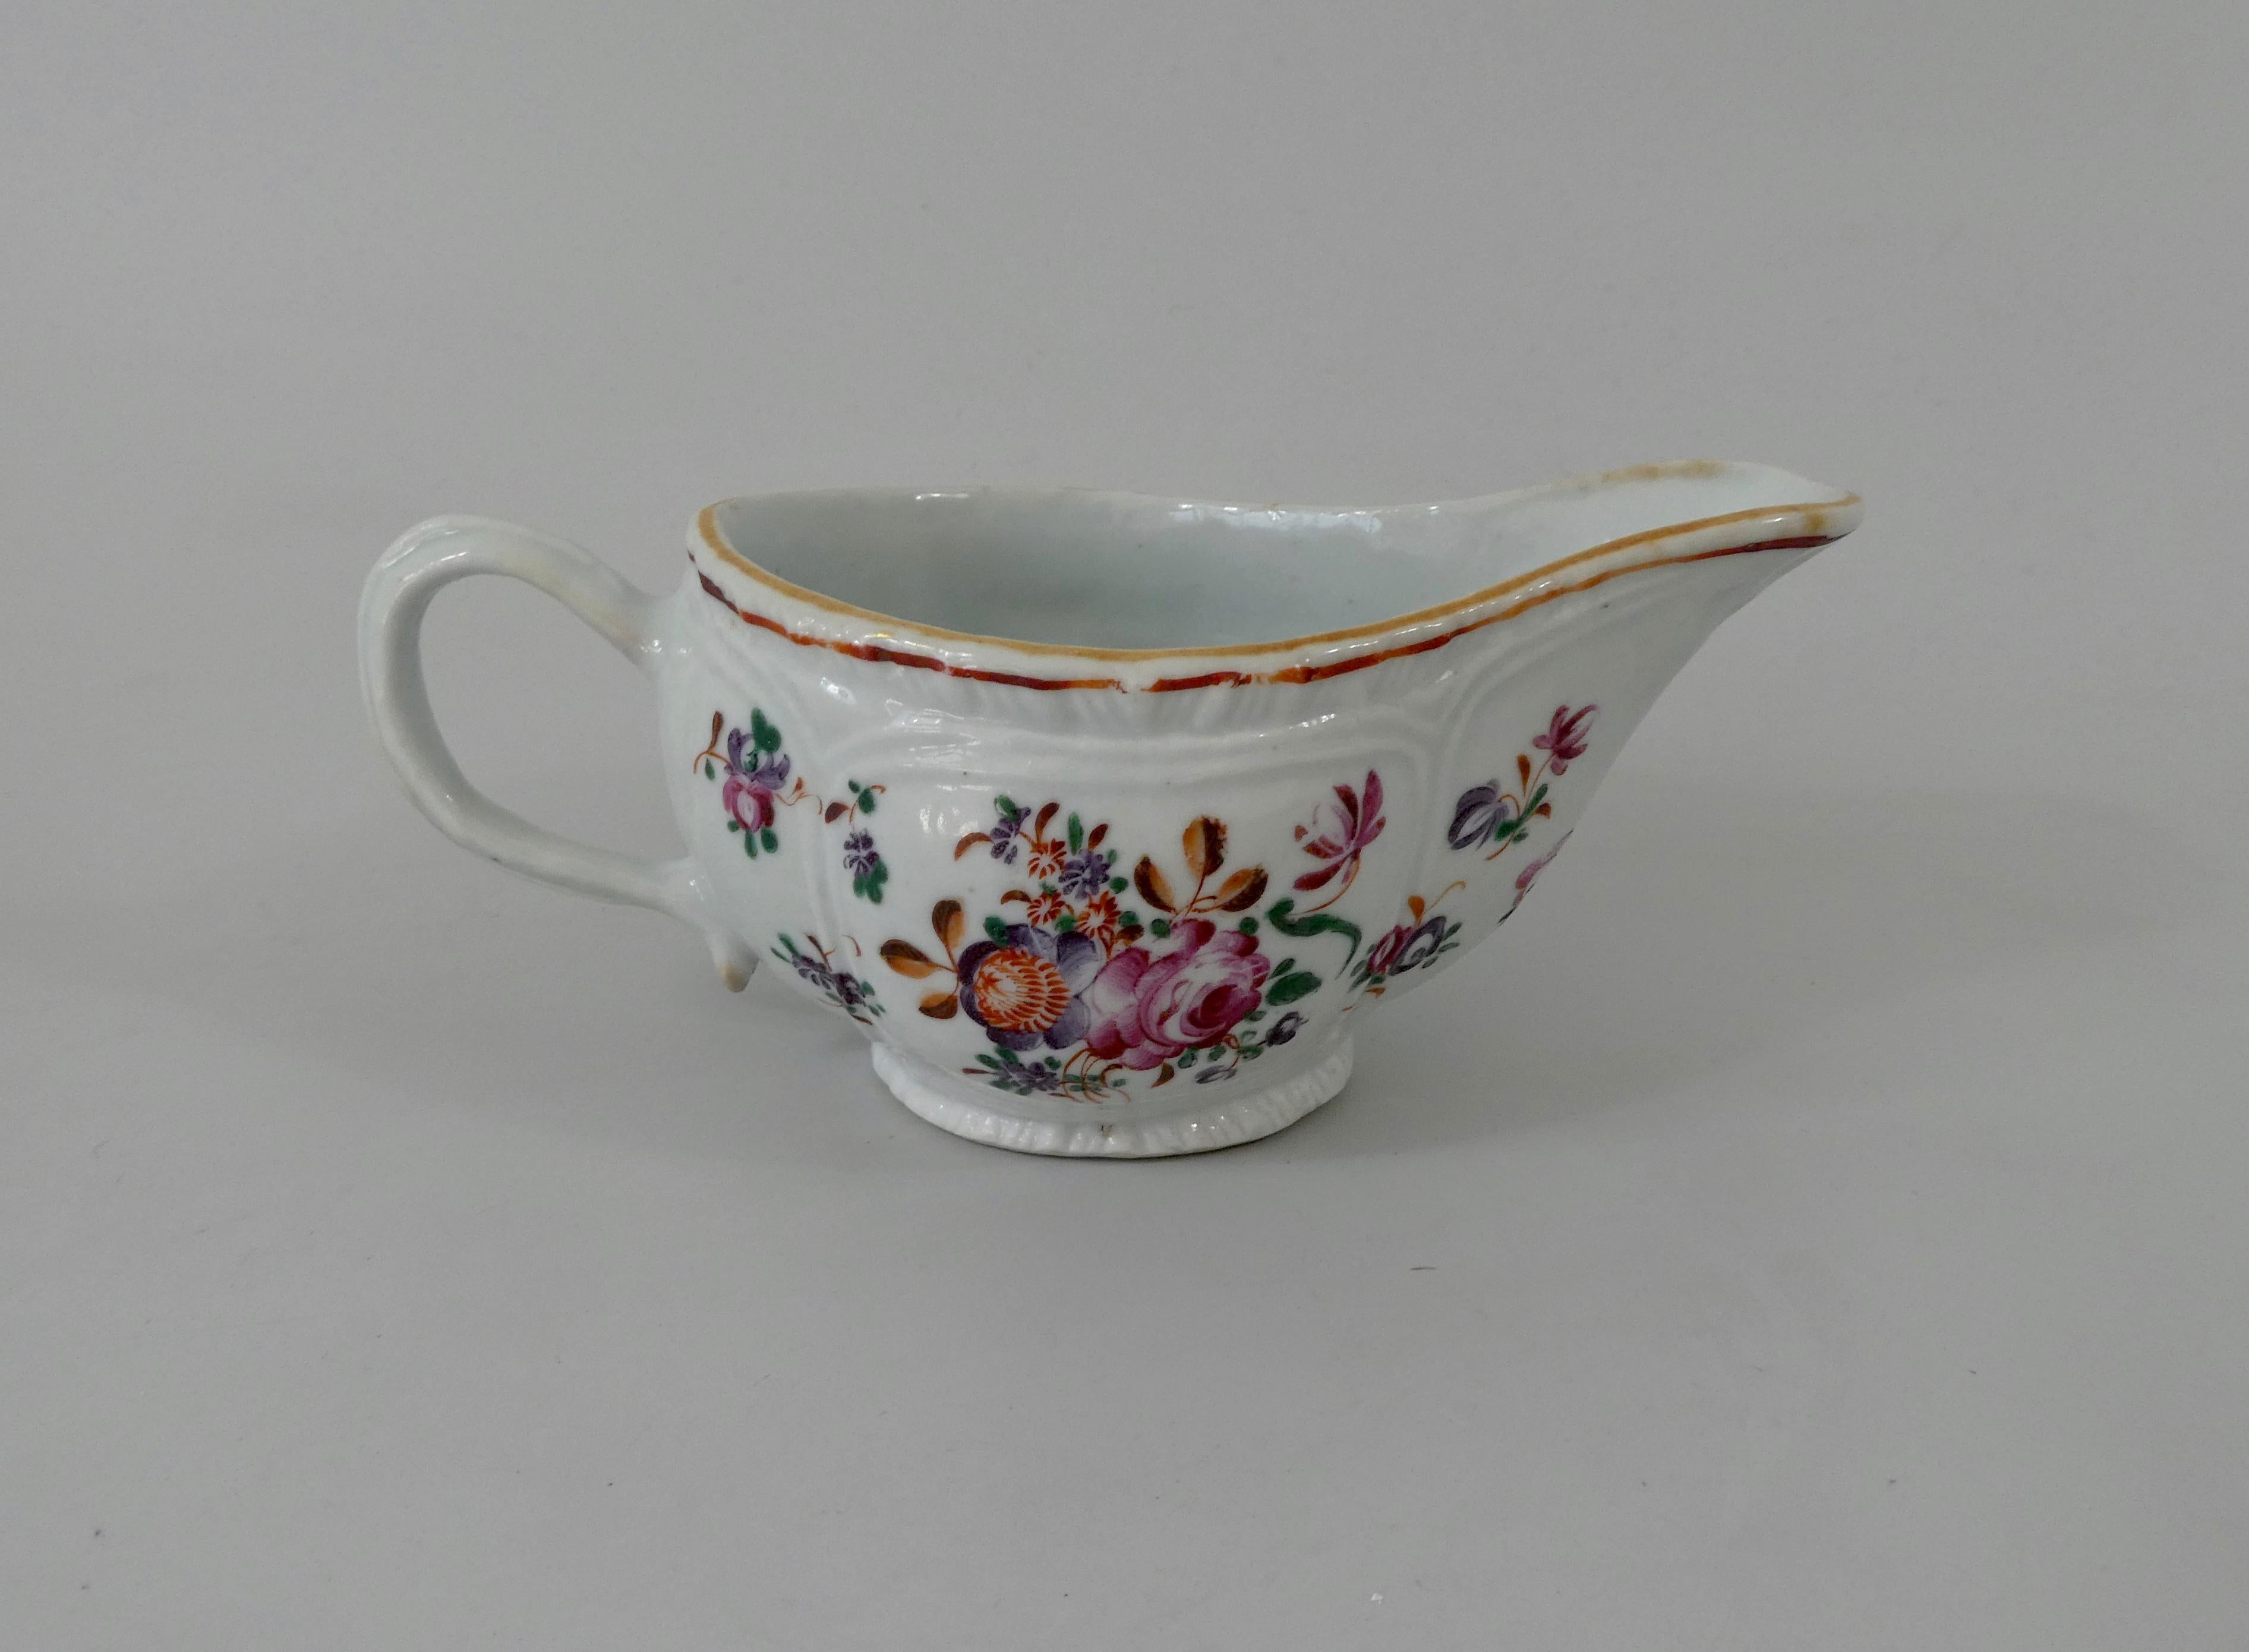 Fired Chinese Porcelain Sauceboat, Famille Rose Decoration, circa 1760 Qianlong Period